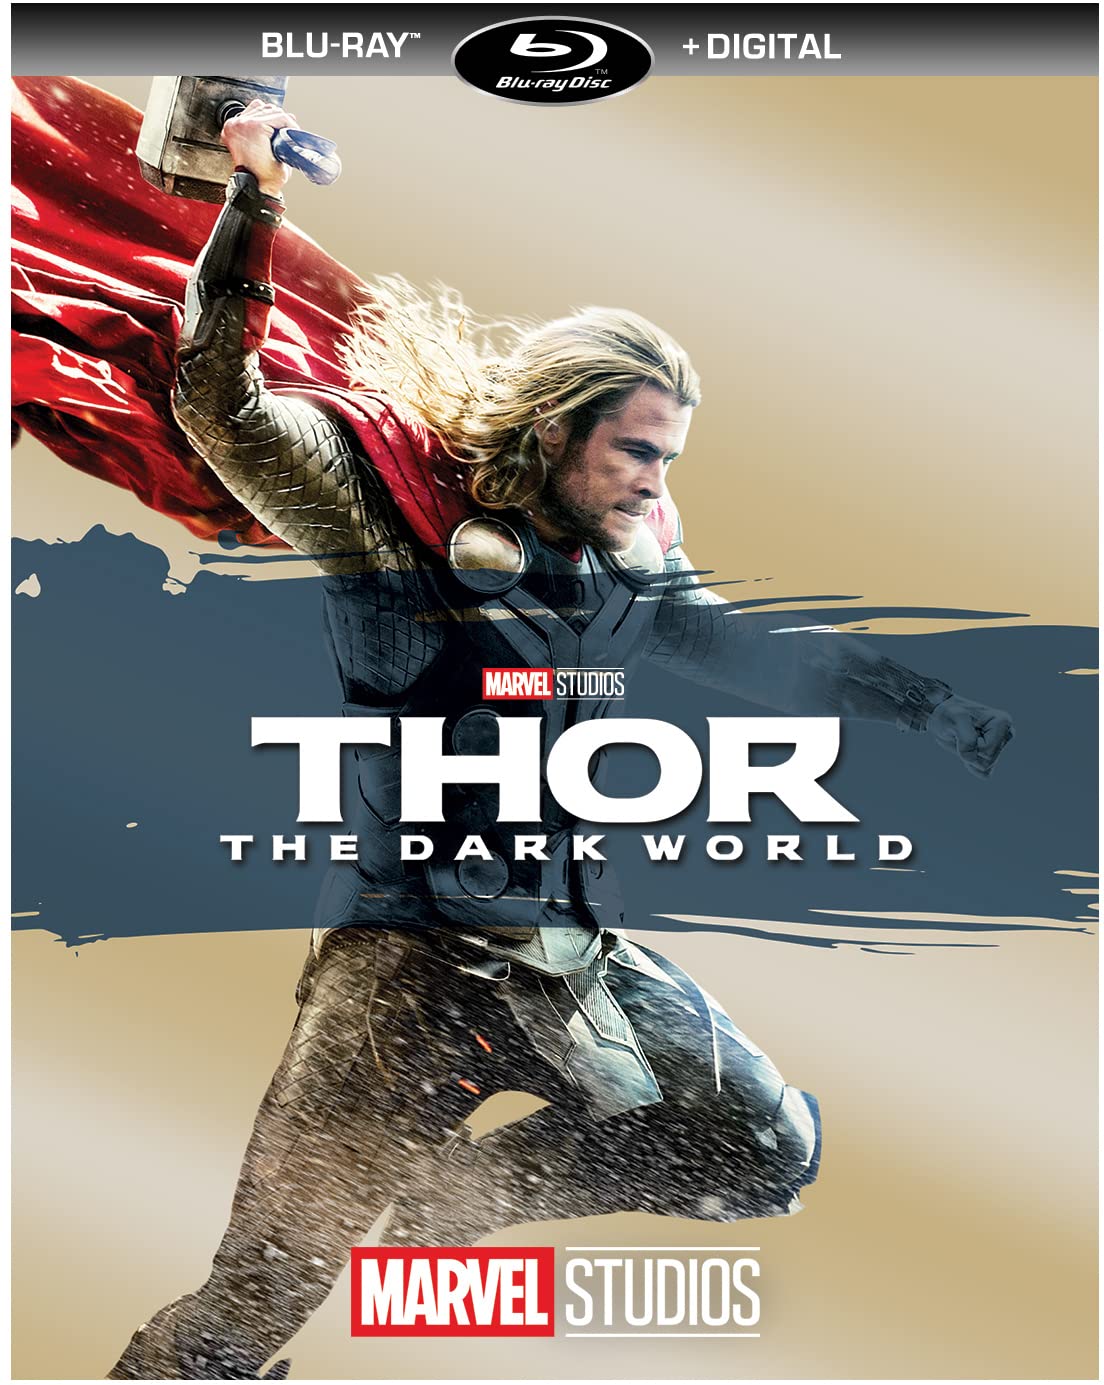 Book Cover Thor: The Dark World